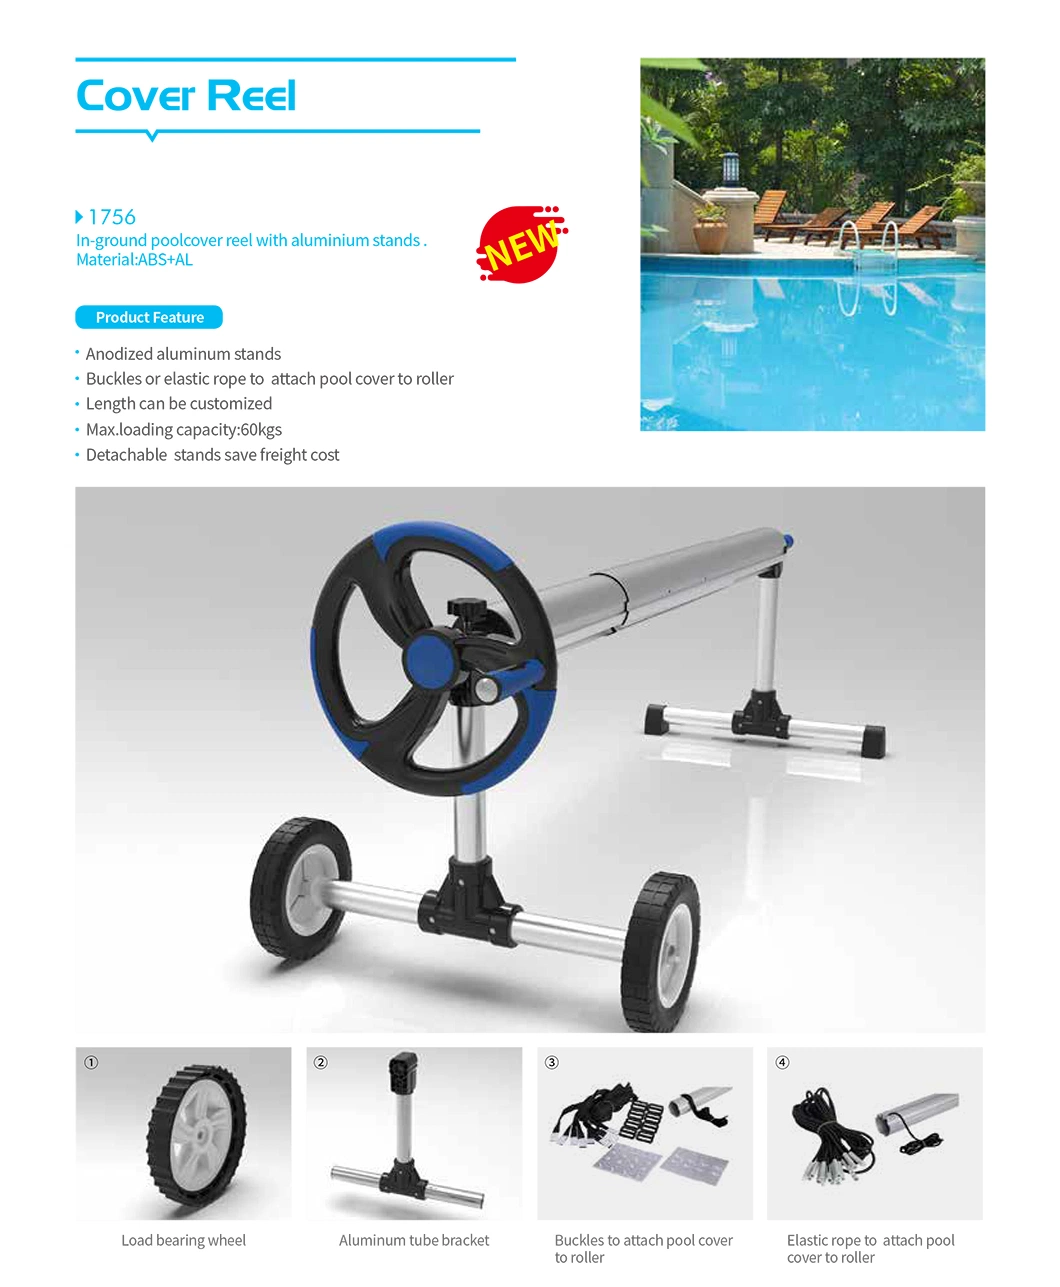 Factory Price 16 Feet Pool Cover Reel for Inground Pool